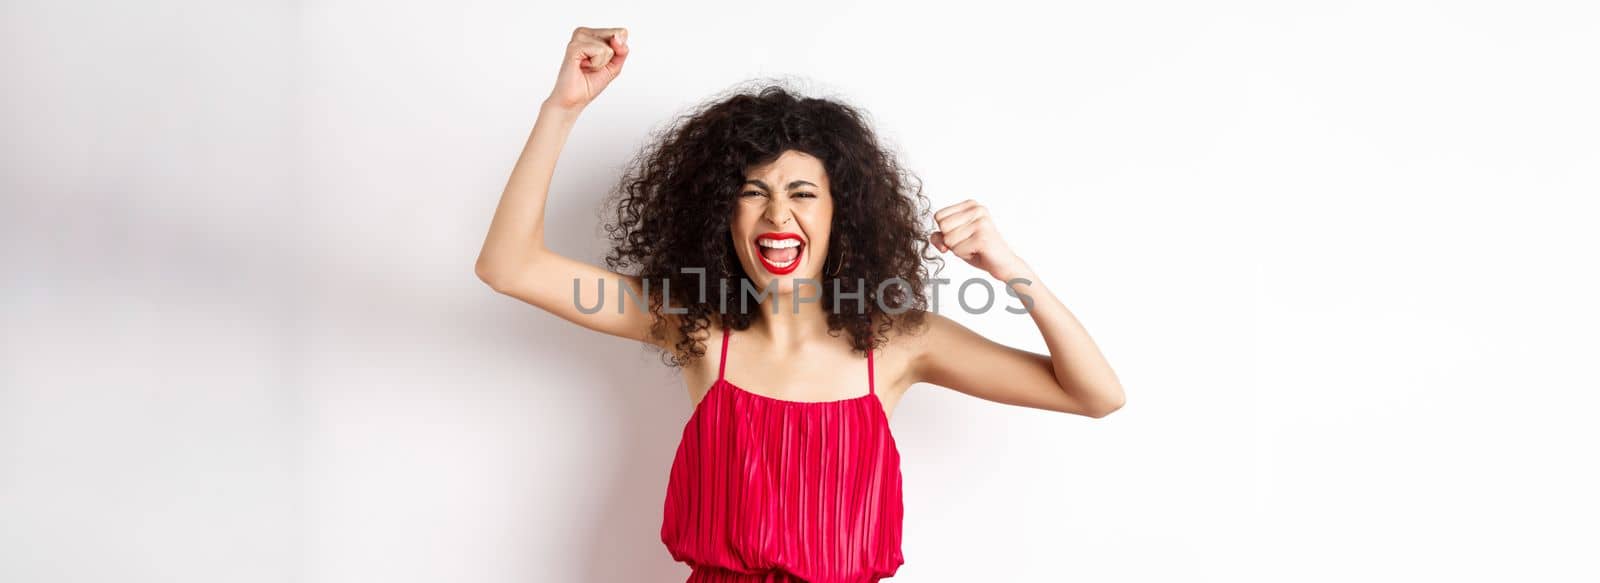 Cheerful emotive woman with curly hair, red dress, raising hands up and chanting, rooting for team, shouting wanting to win, standing on white background by Benzoix